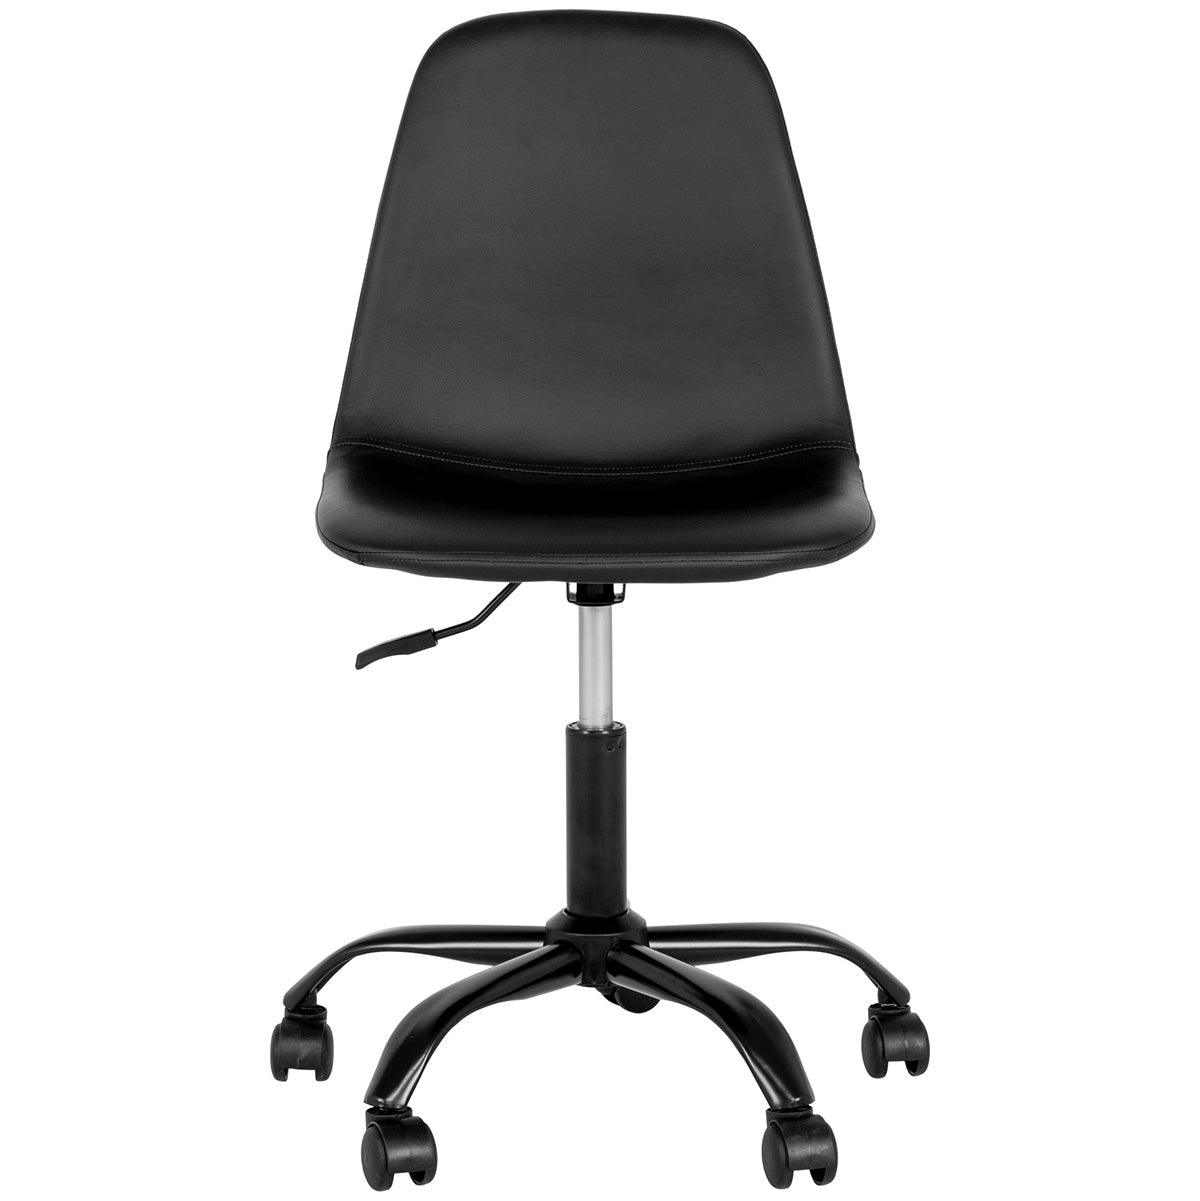 Stockholm Office Chair - WOO .Design